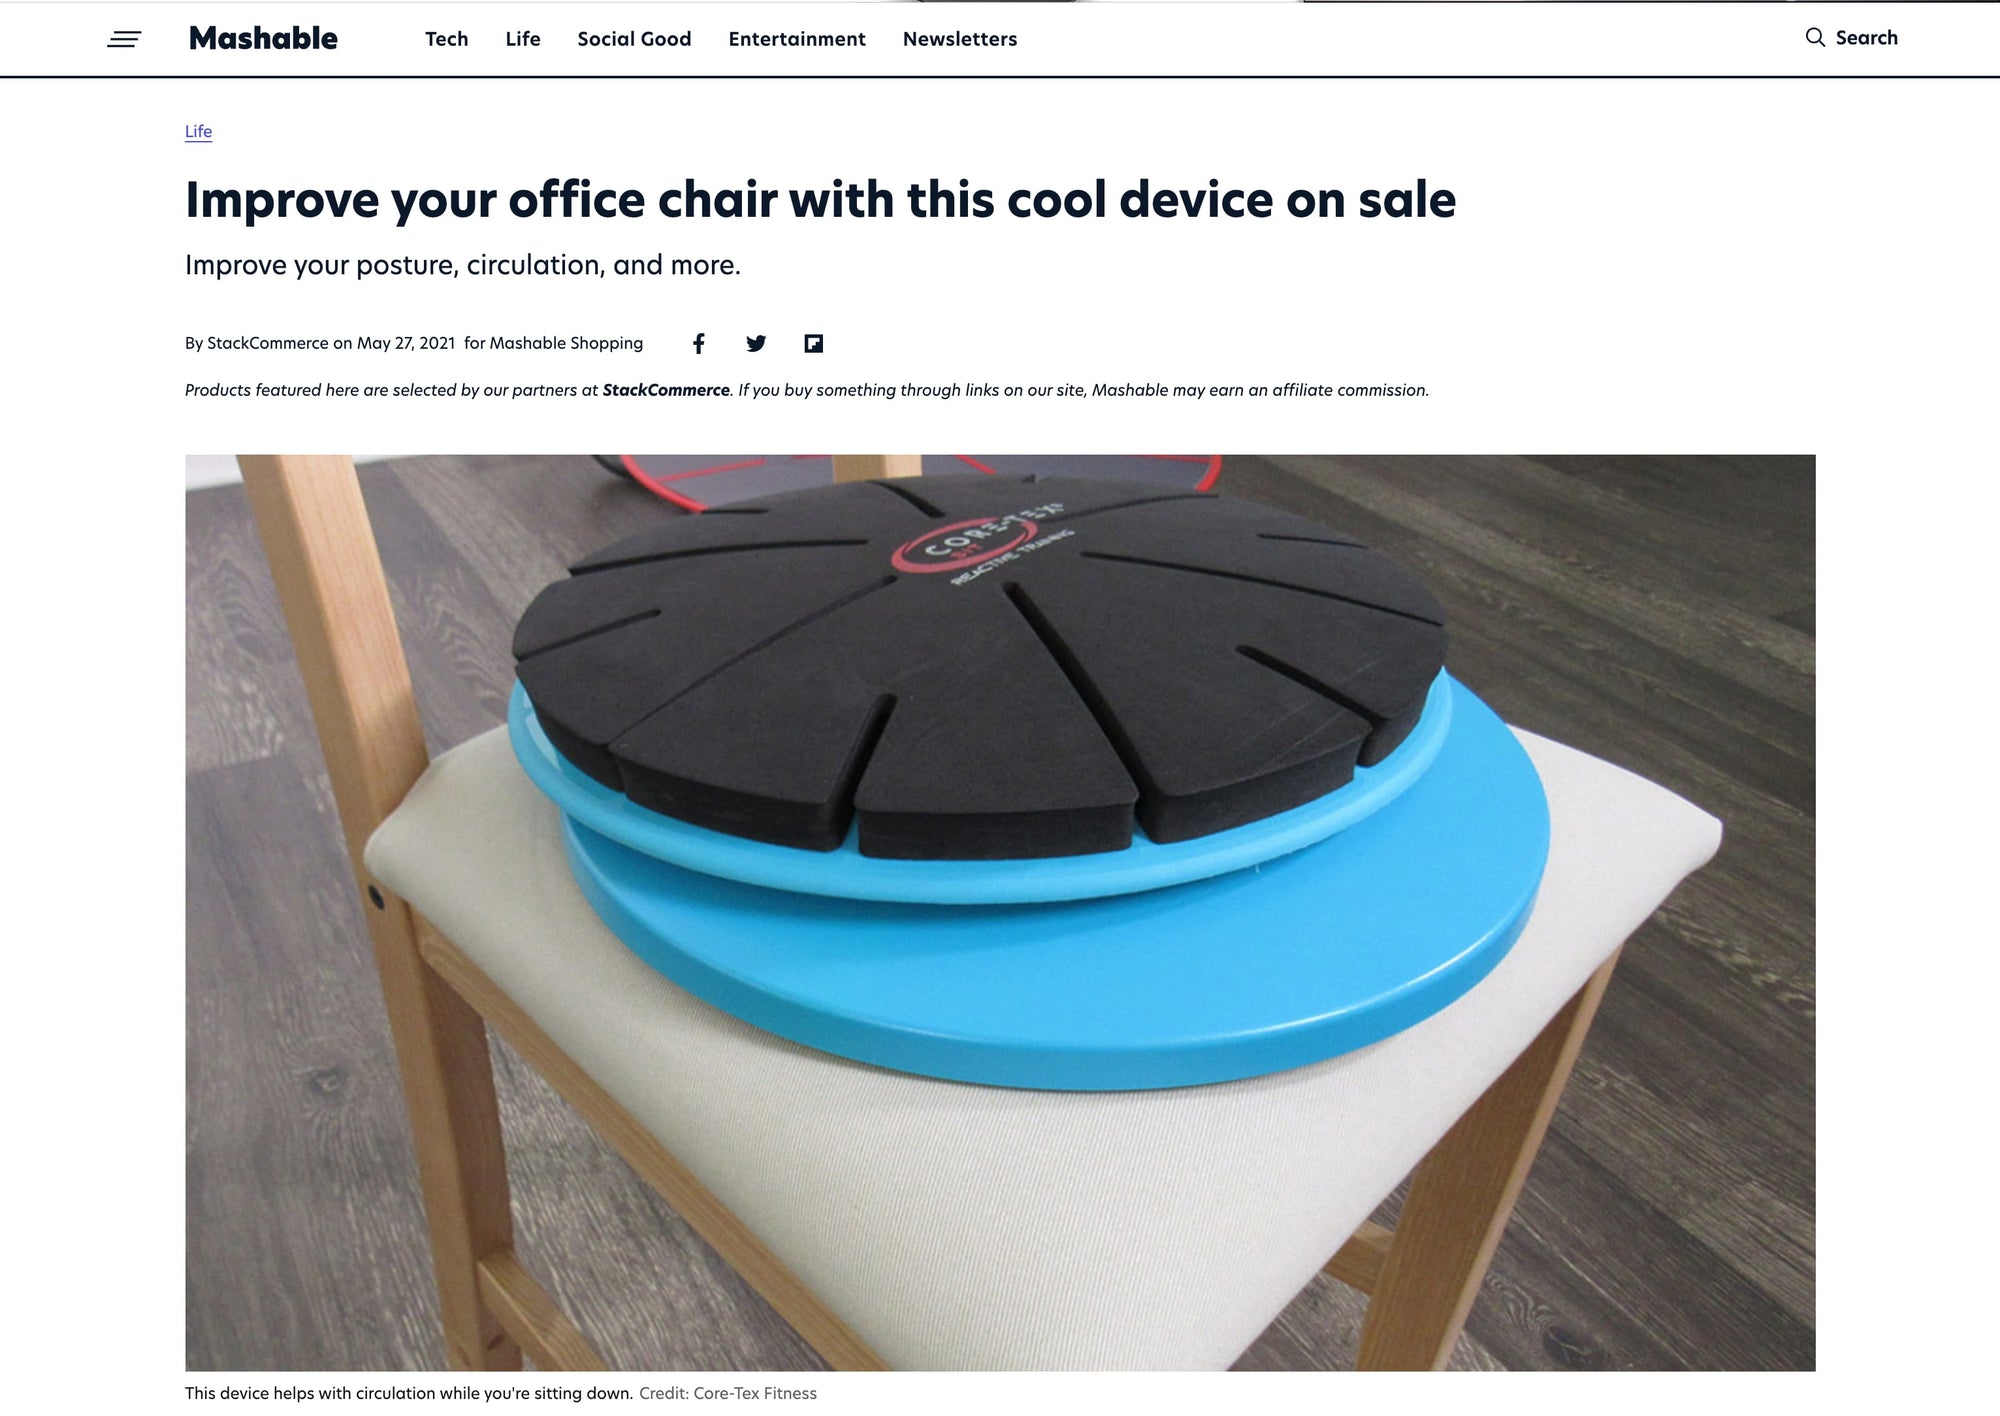 Mashable: Improve your office chair with this cool device